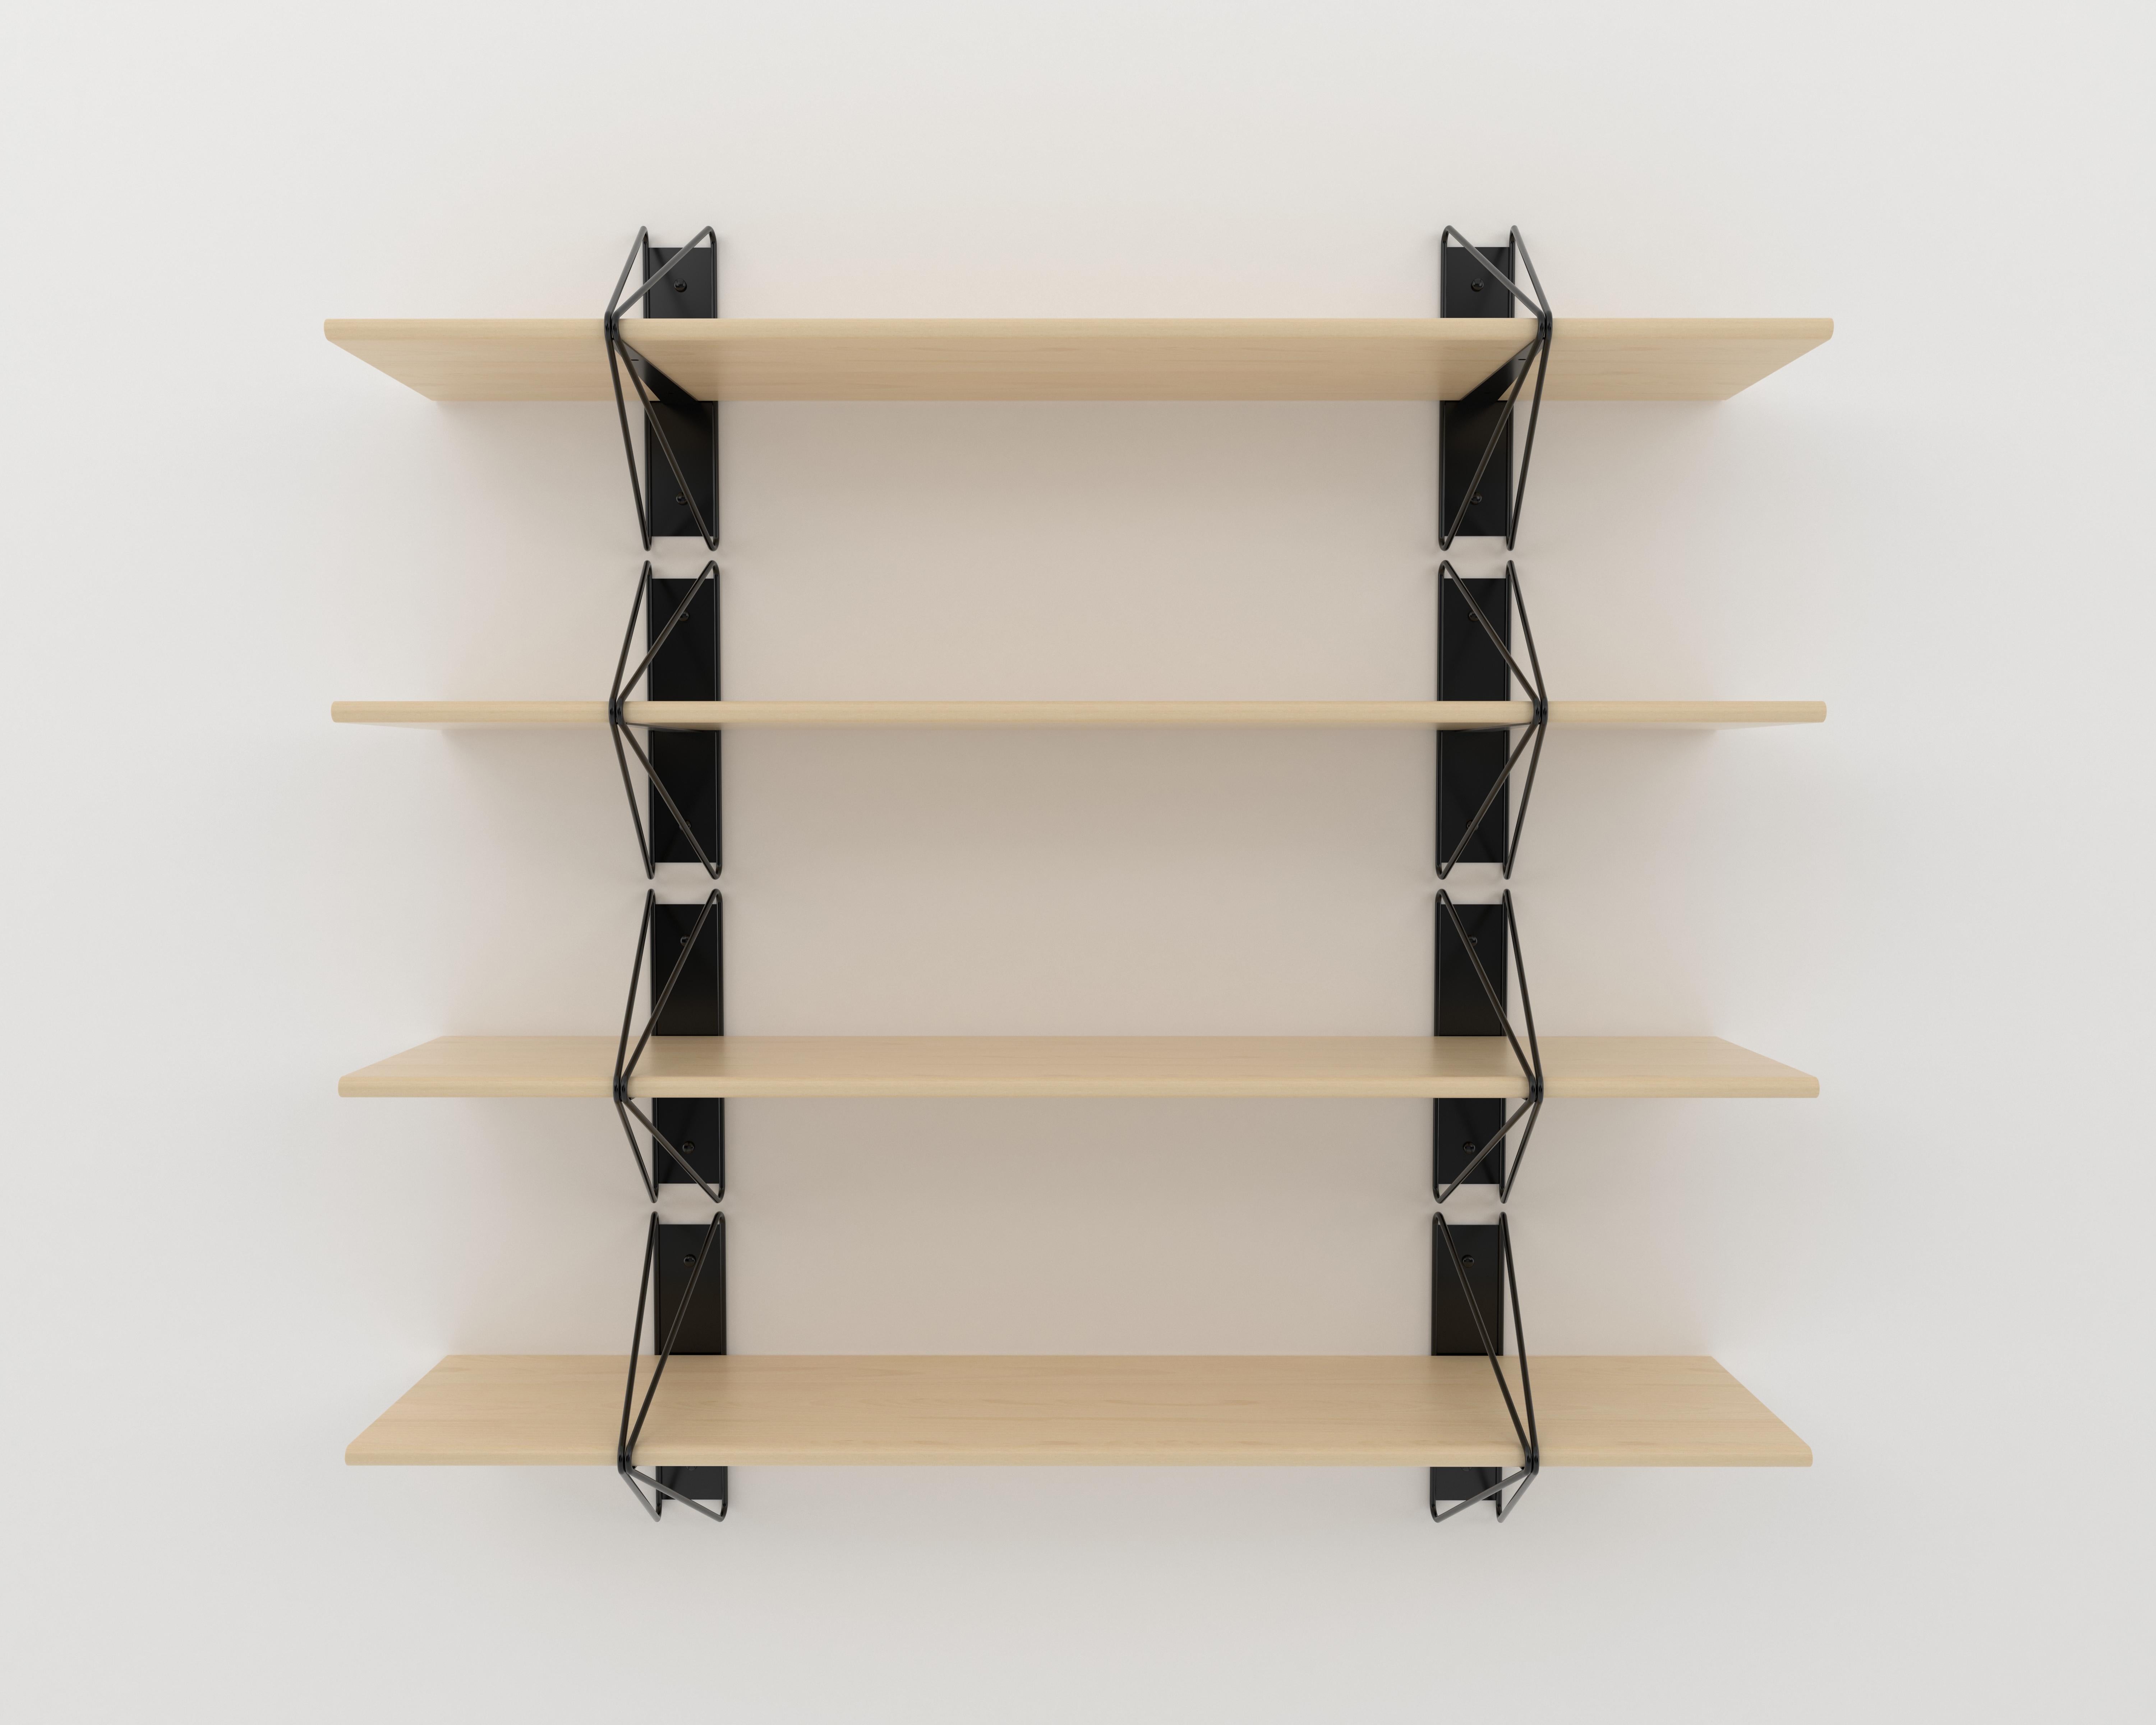 Powder-Coated Set of 3 Strut Shelves from Souda, White and Maple, Made to Order For Sale